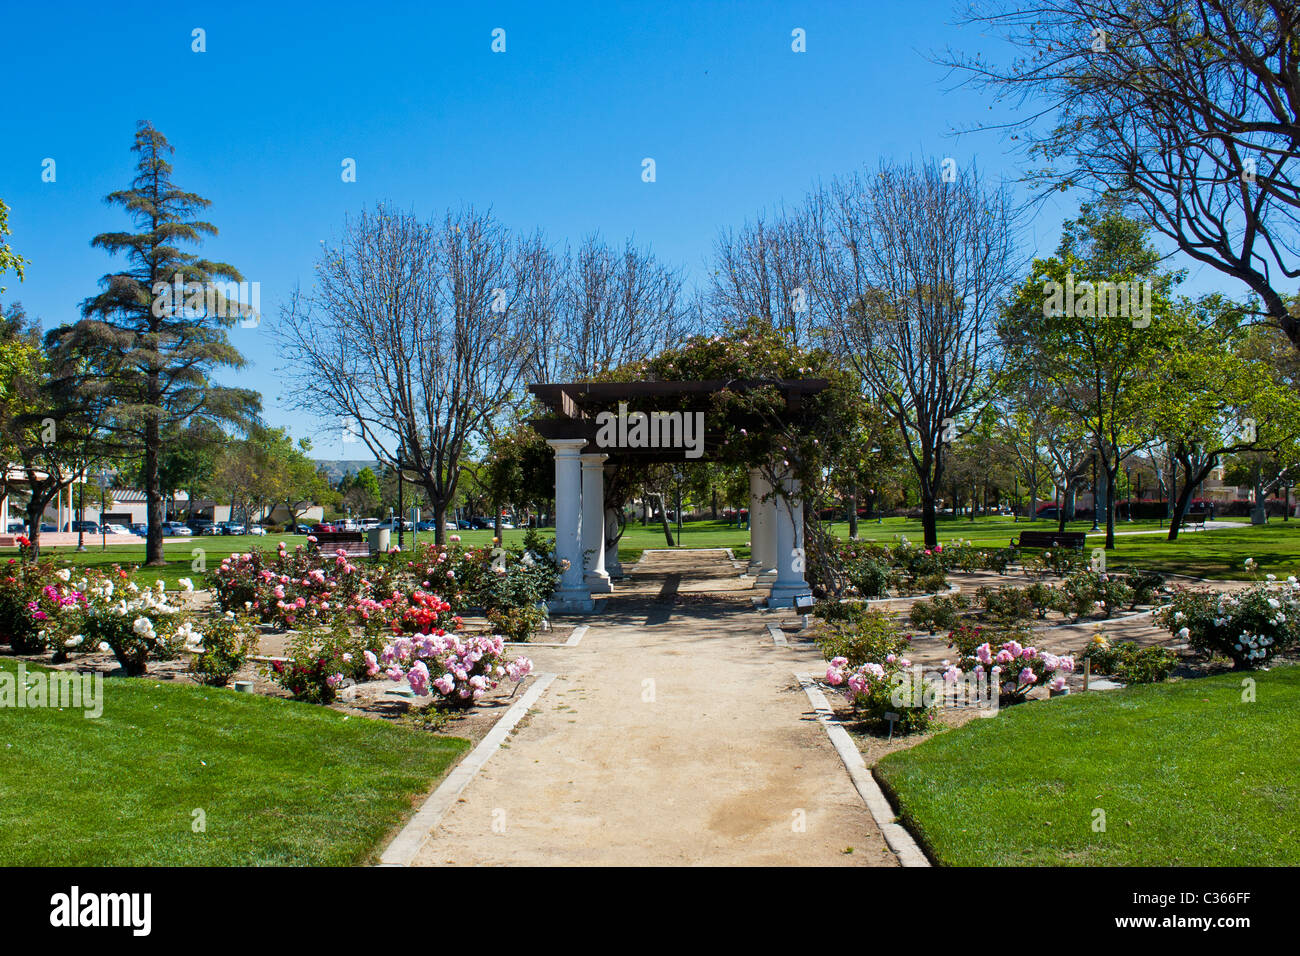 A small rose garden and arbor at the Camarillo California City Hall with a pathway through it Stock Photo